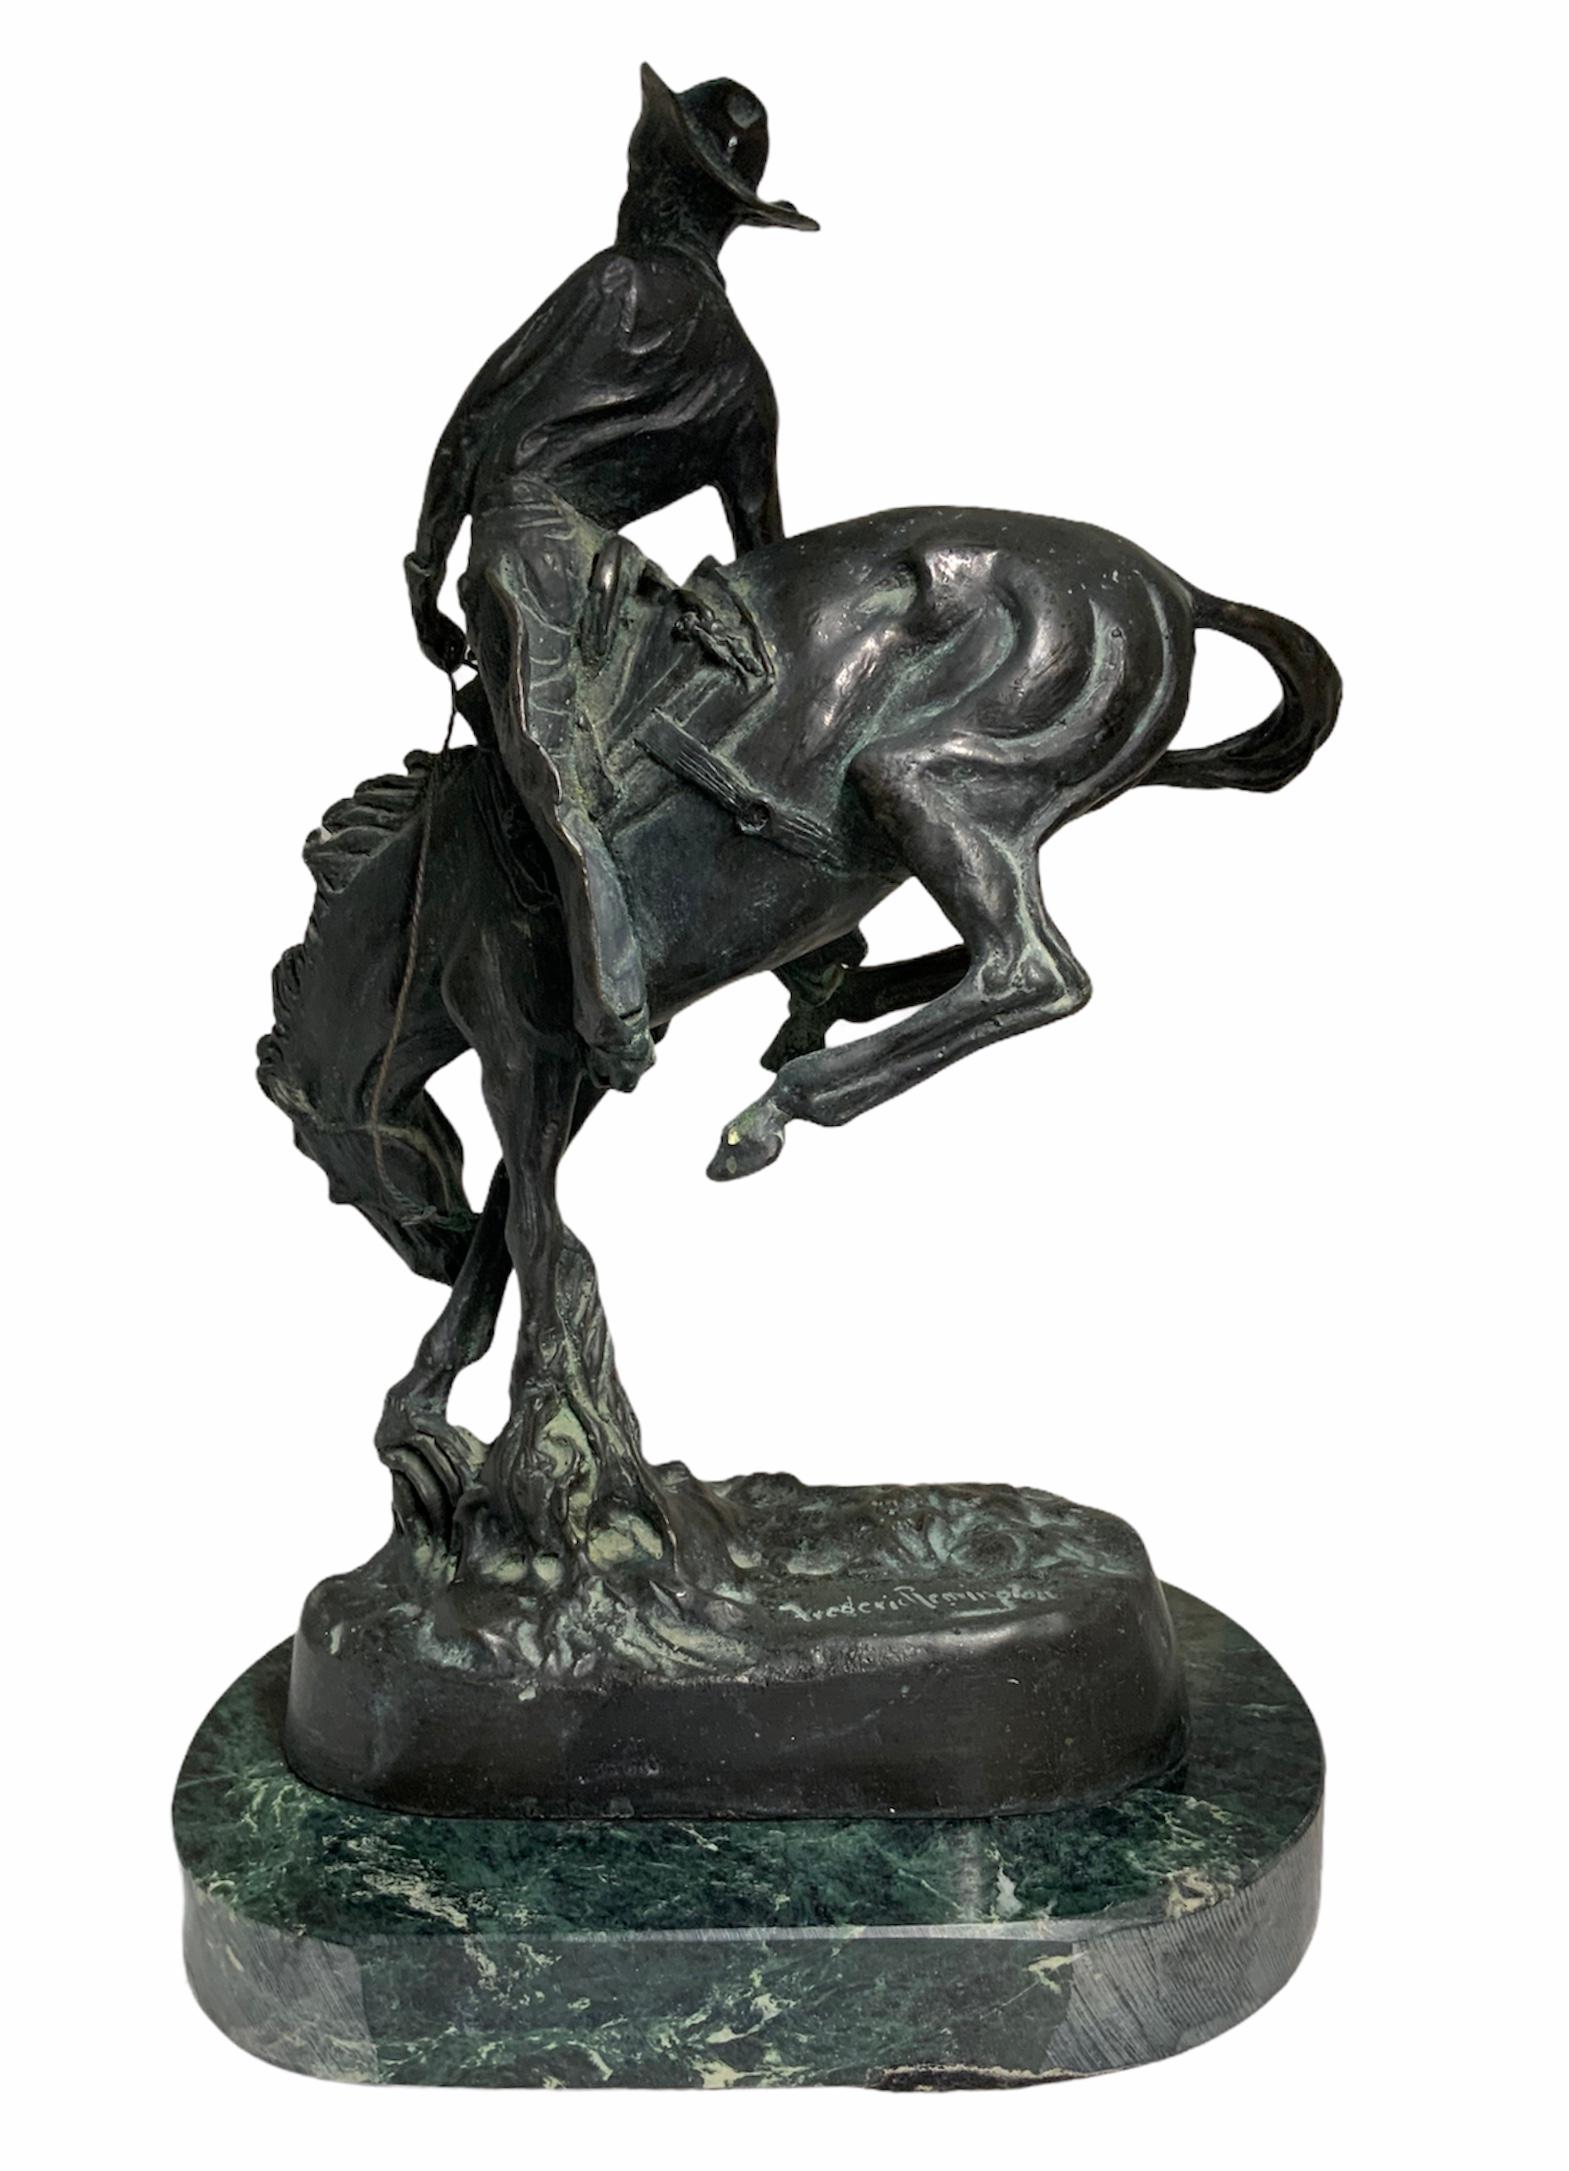 American Craftsman Frederic Remington Patinated Bronze Sculpture “The Outlaw”